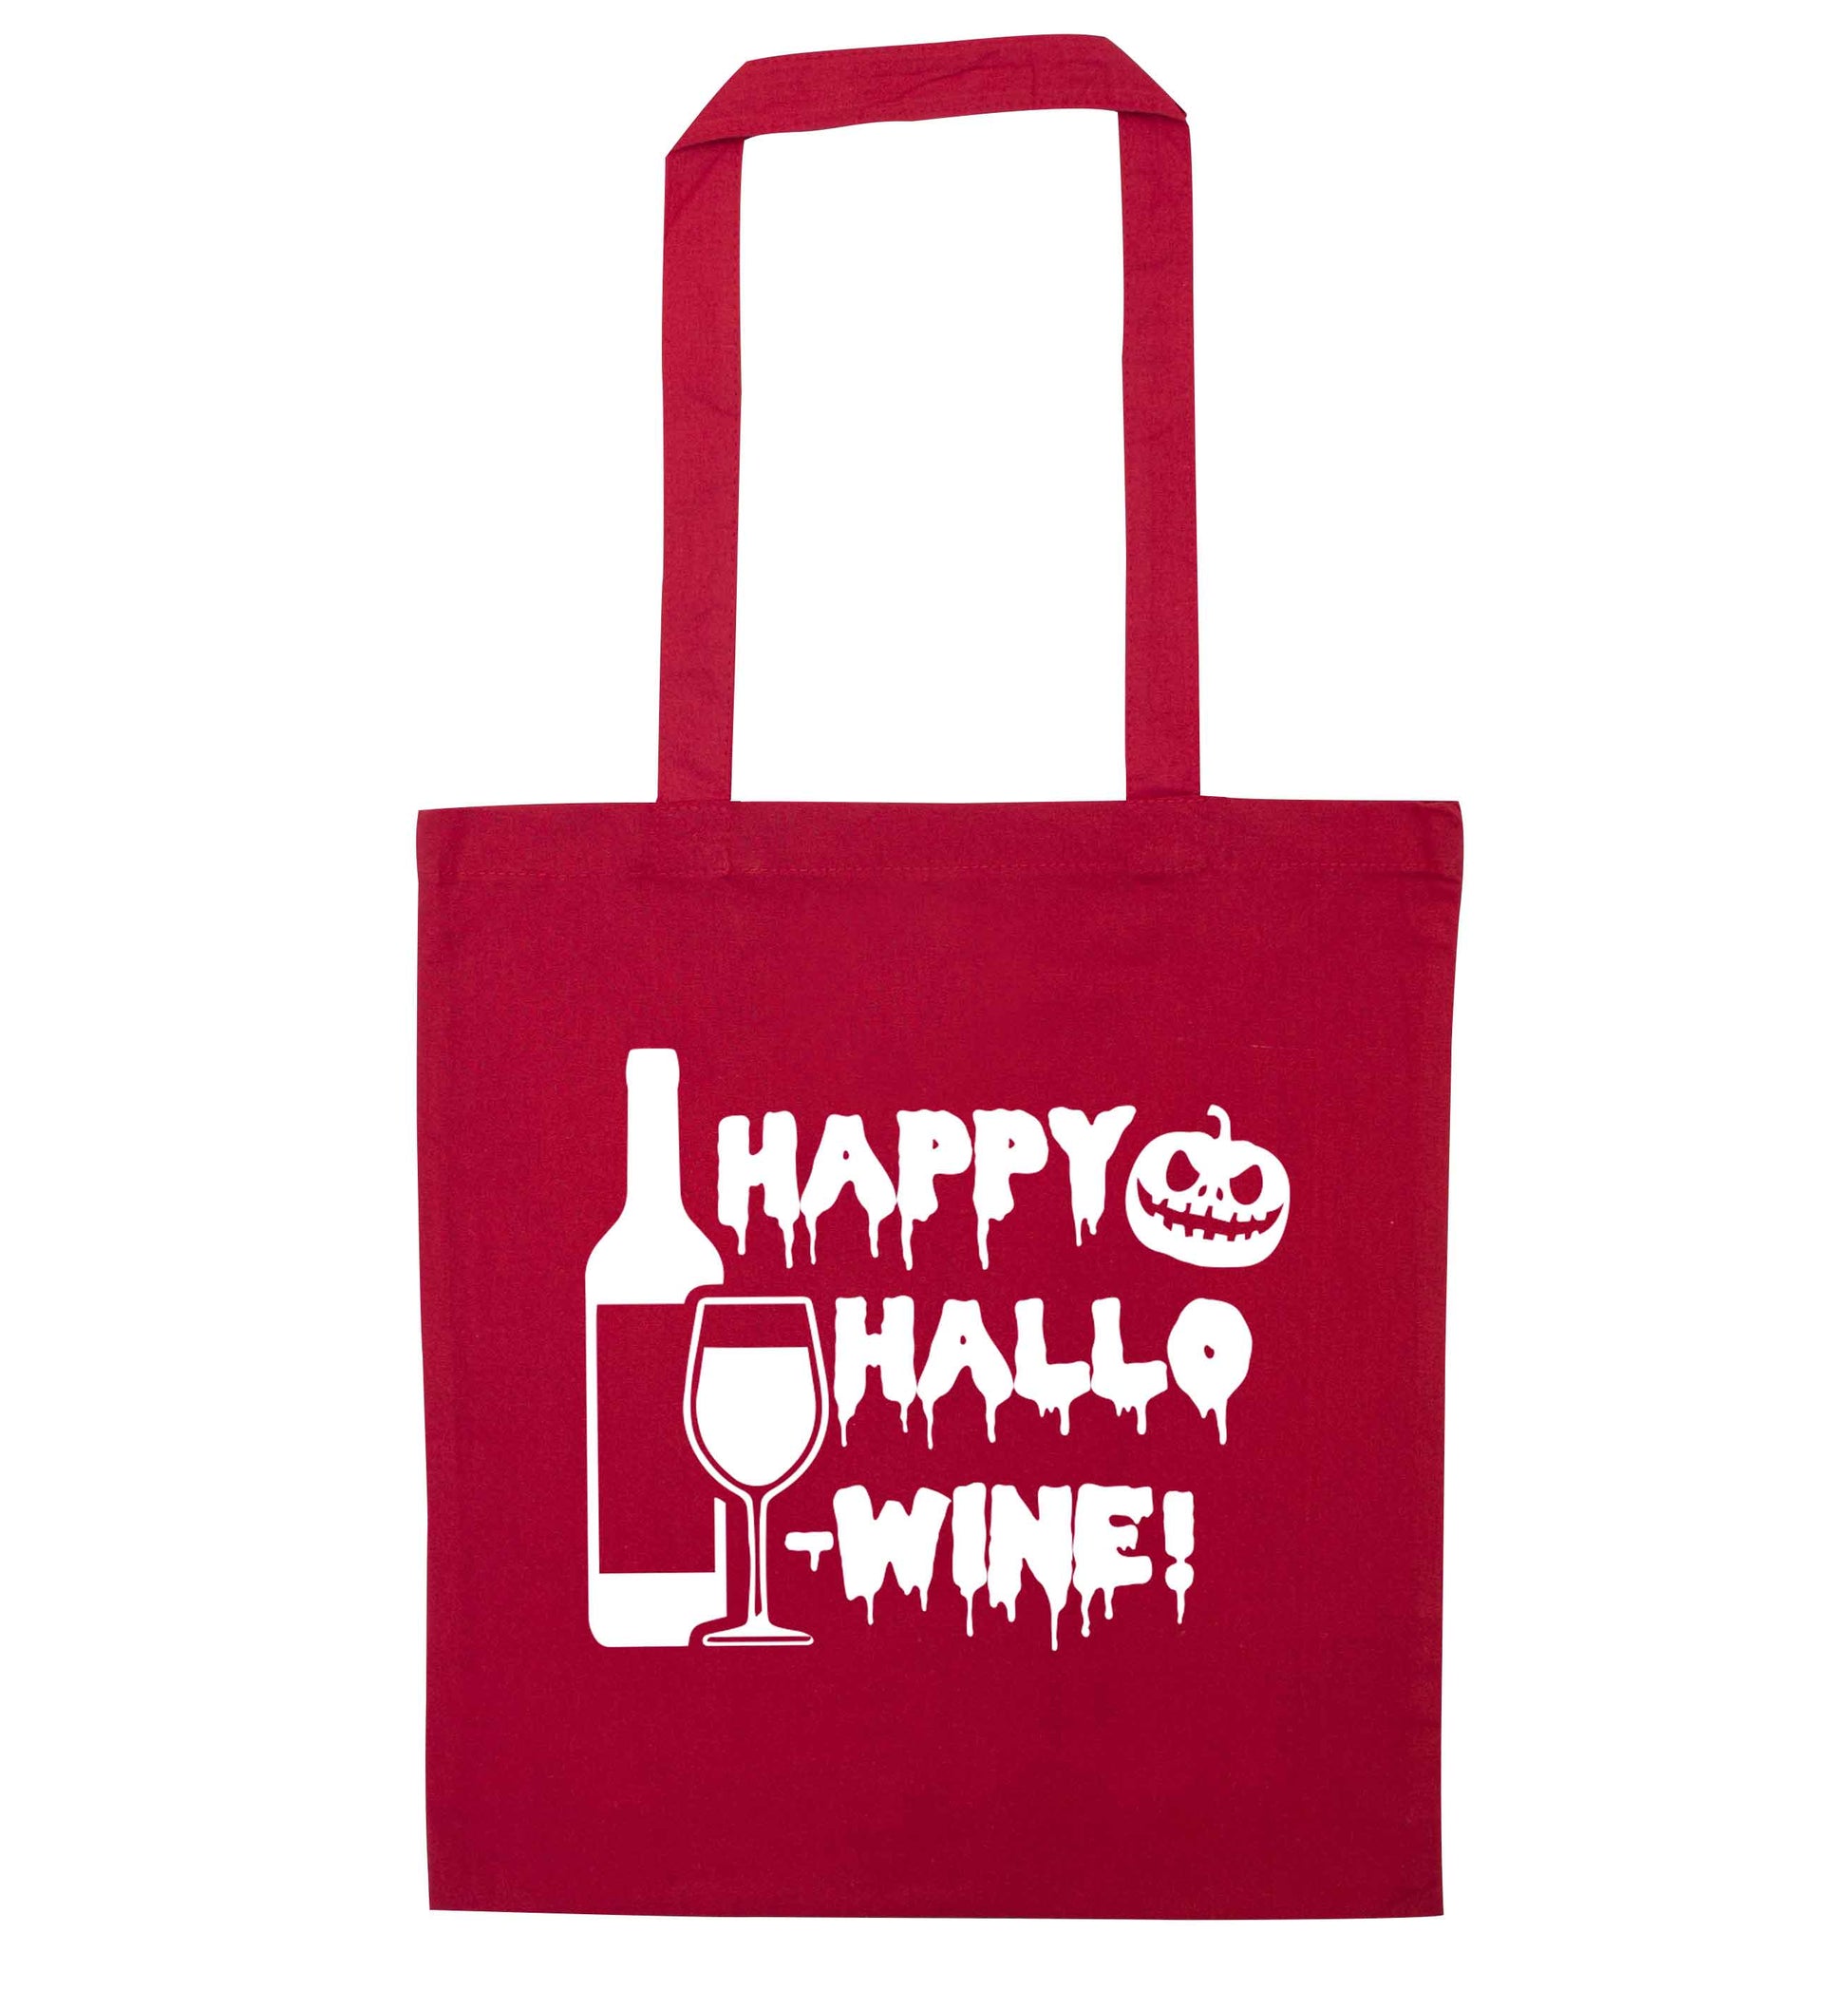 Happy hallow-wine red tote bag